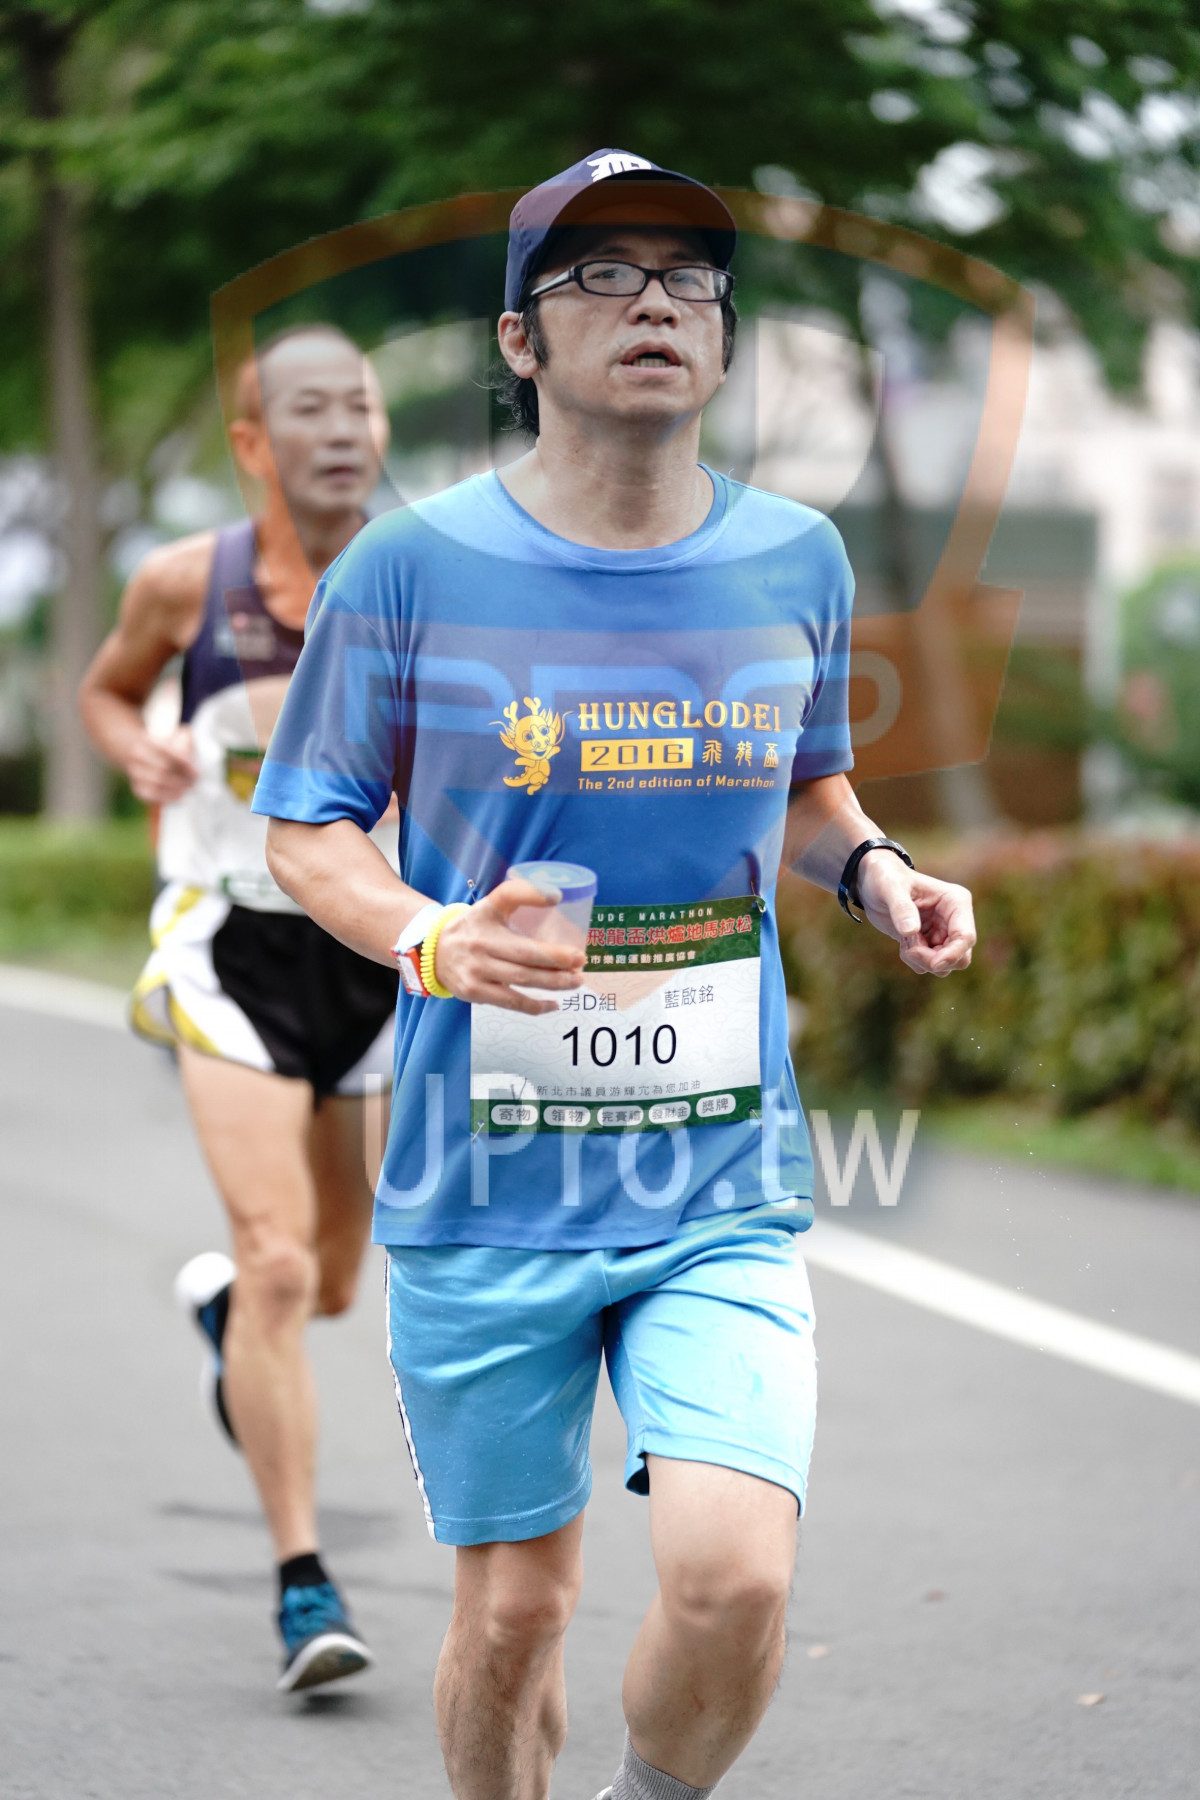 HUNGLODEI,2016,The 2nd edition of Marathaw,,1010|